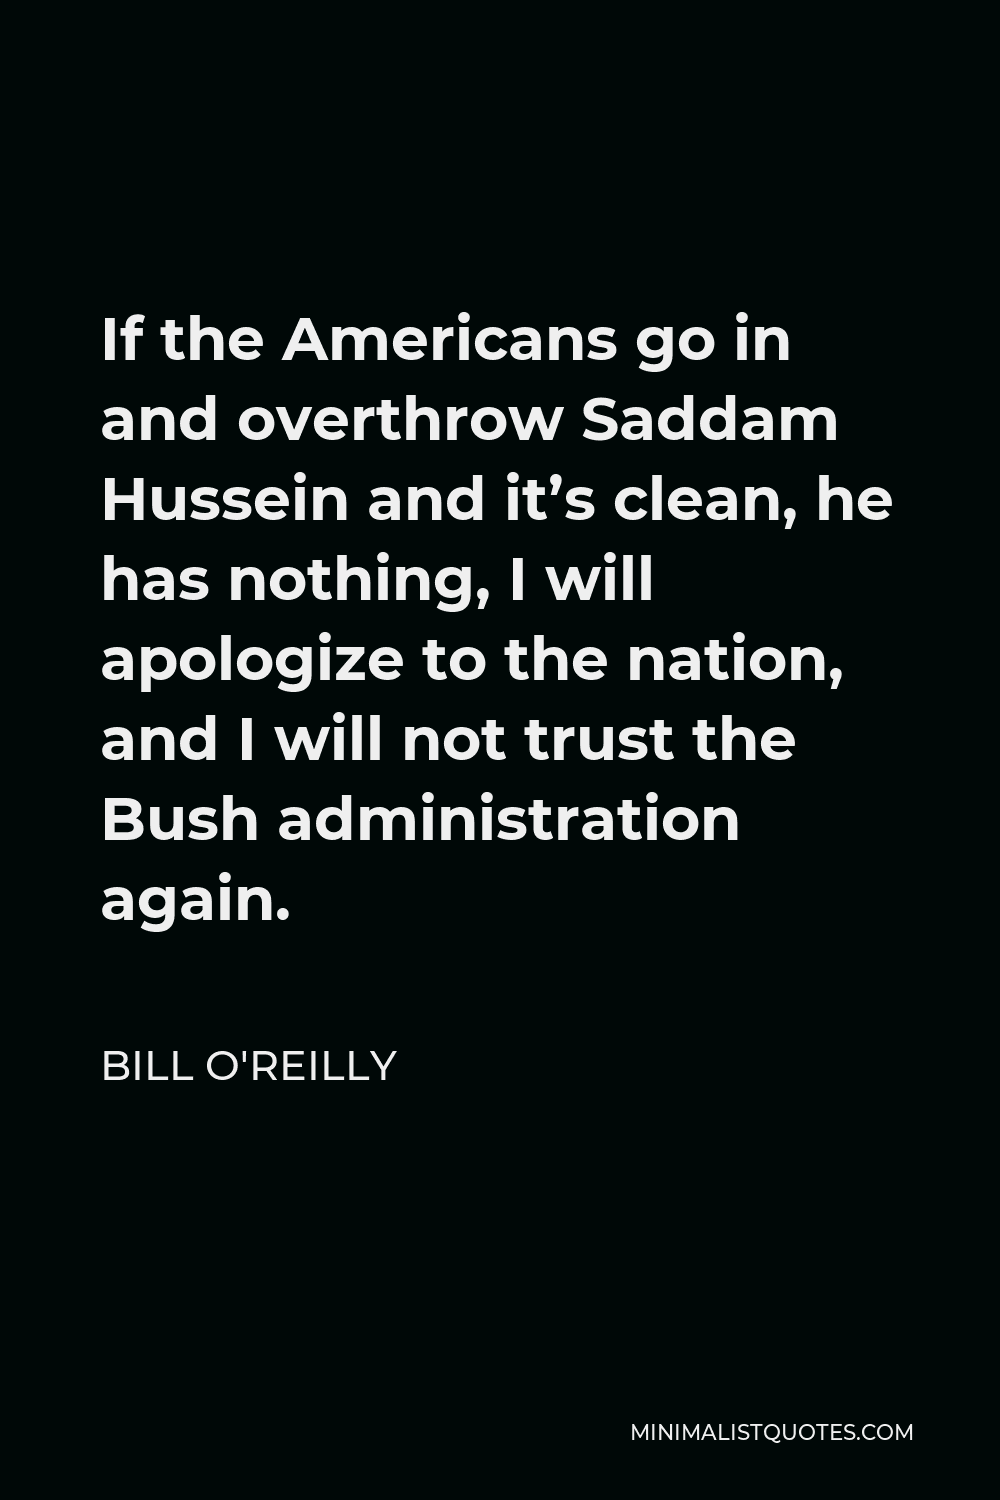 Bill O'Reilly Quote - If the Americans go in and overthrow Saddam Hussein and it’s clean, he has nothing, I will apologize to the nation, and I will not trust the Bush administration again.